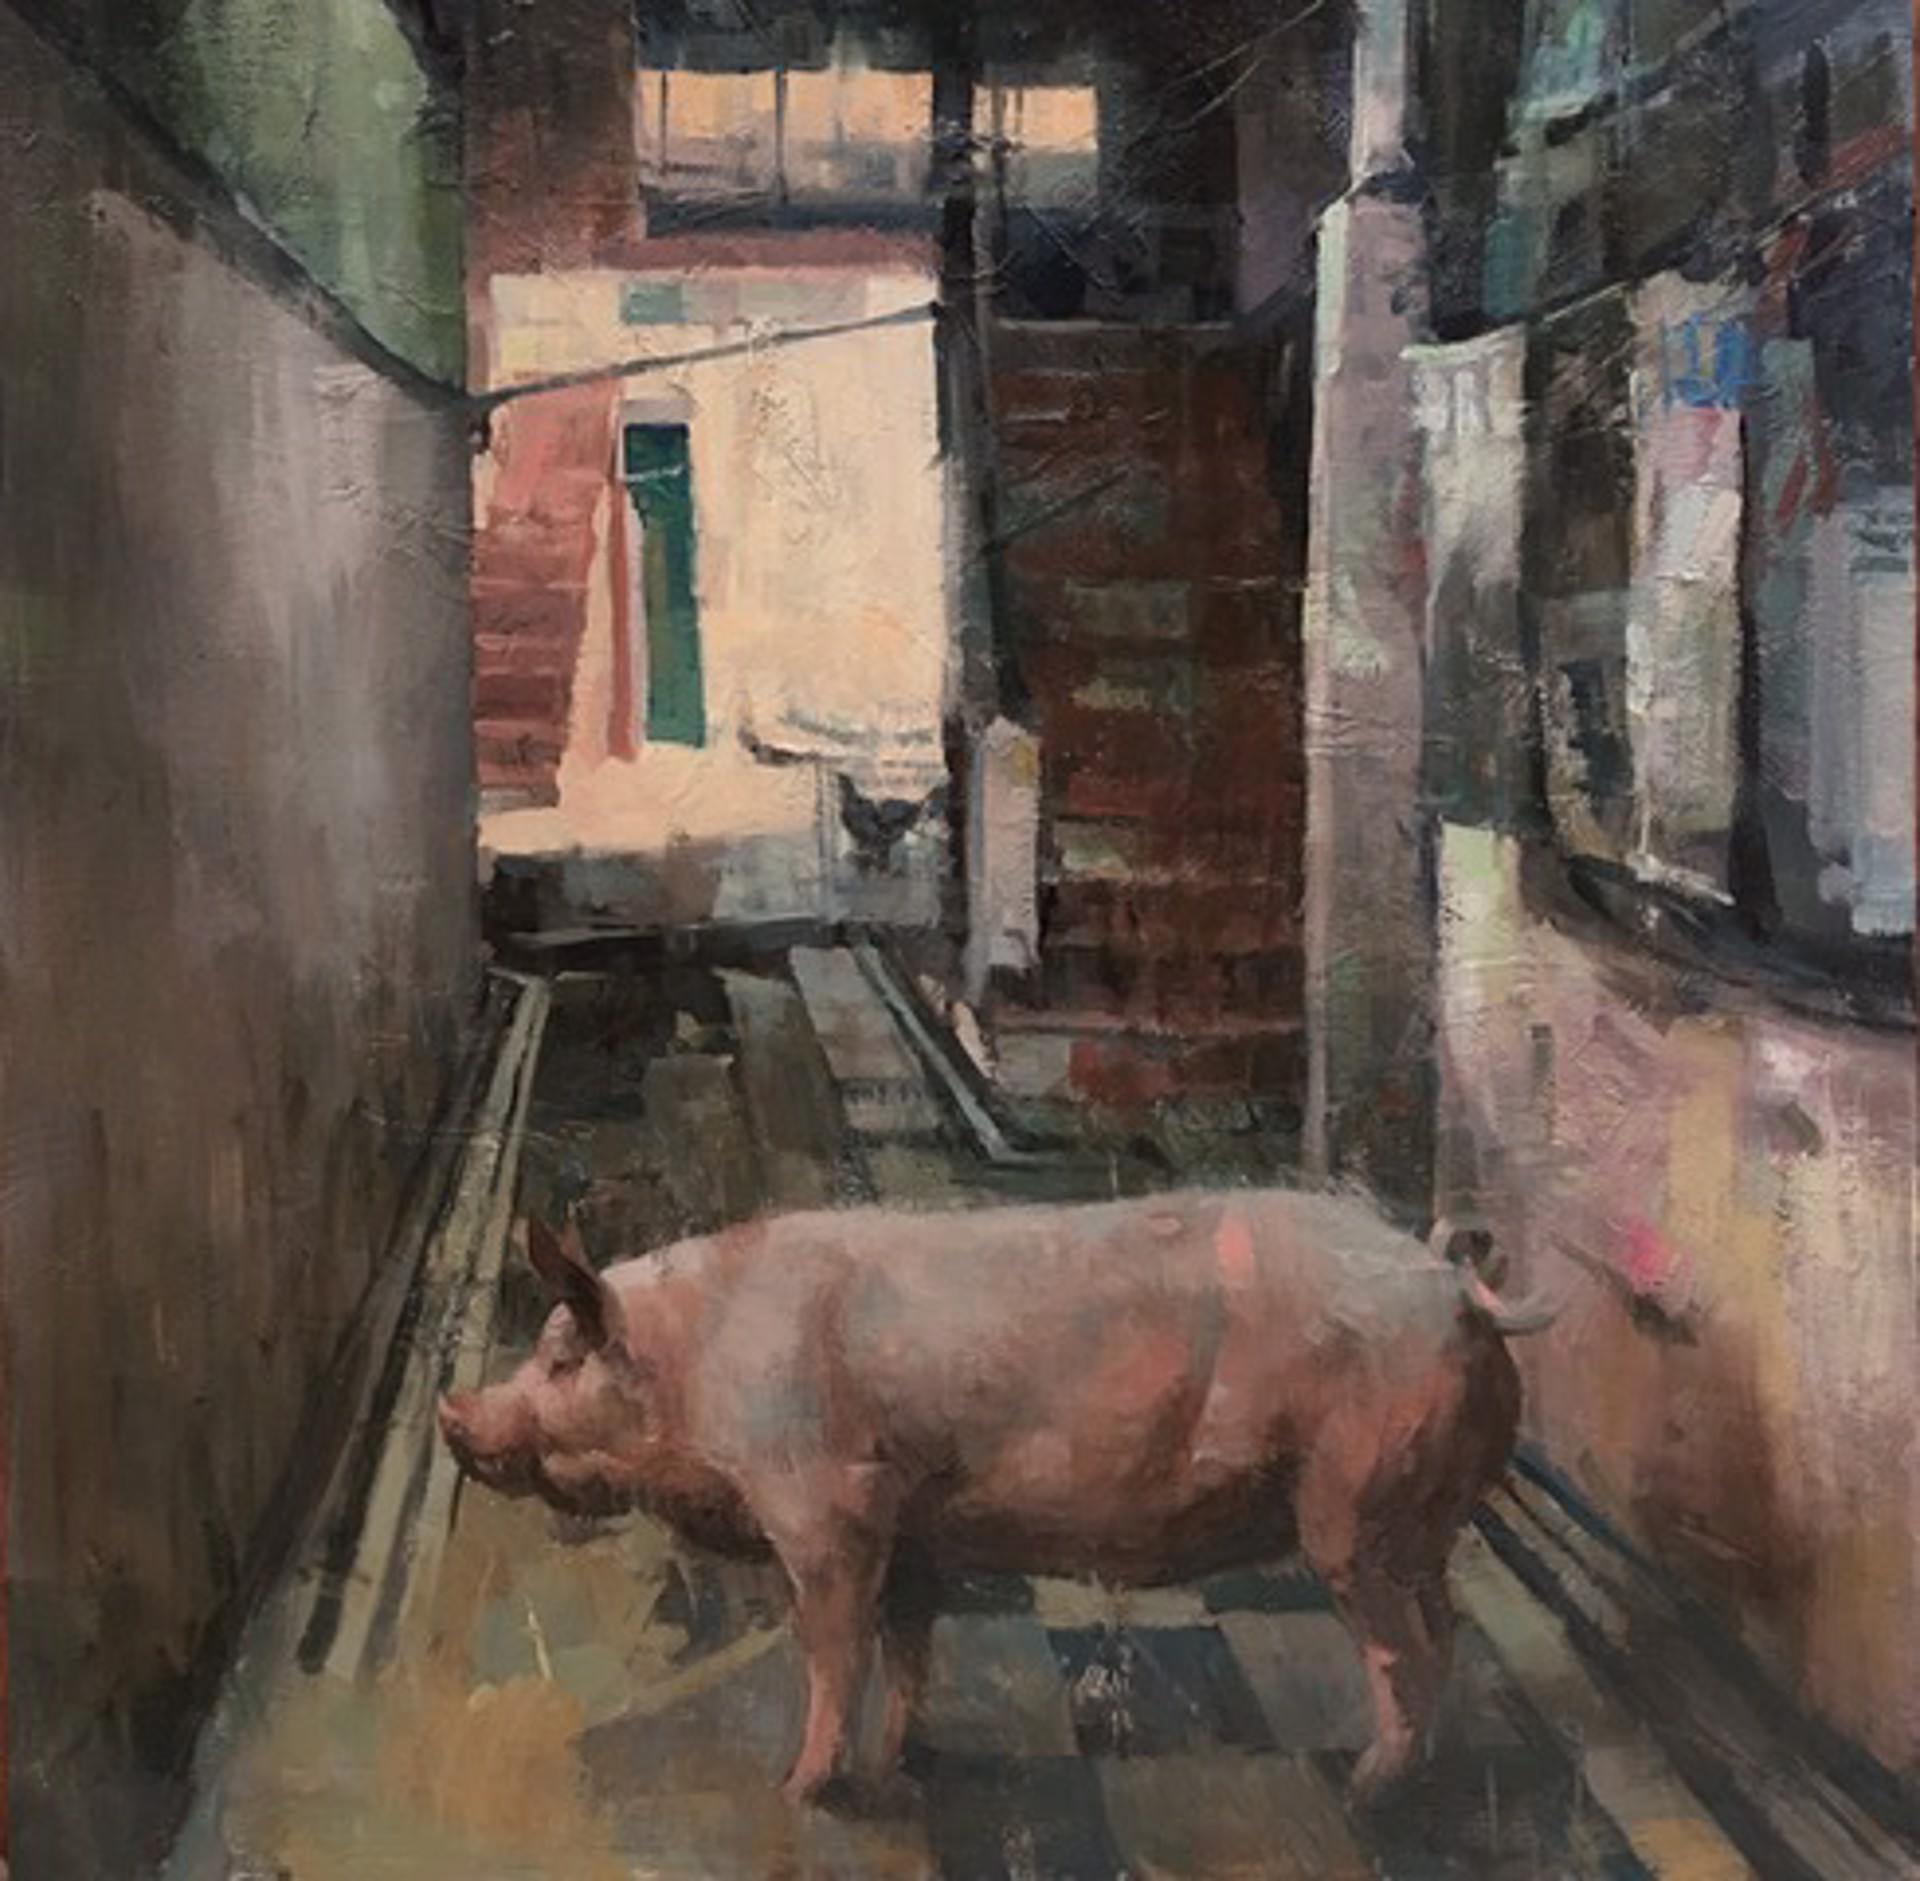 A Pig In A Narrow Rundown Alley, The Viewer Wonders Why It Is There, By Larry Moore, Available At Gallery Wild